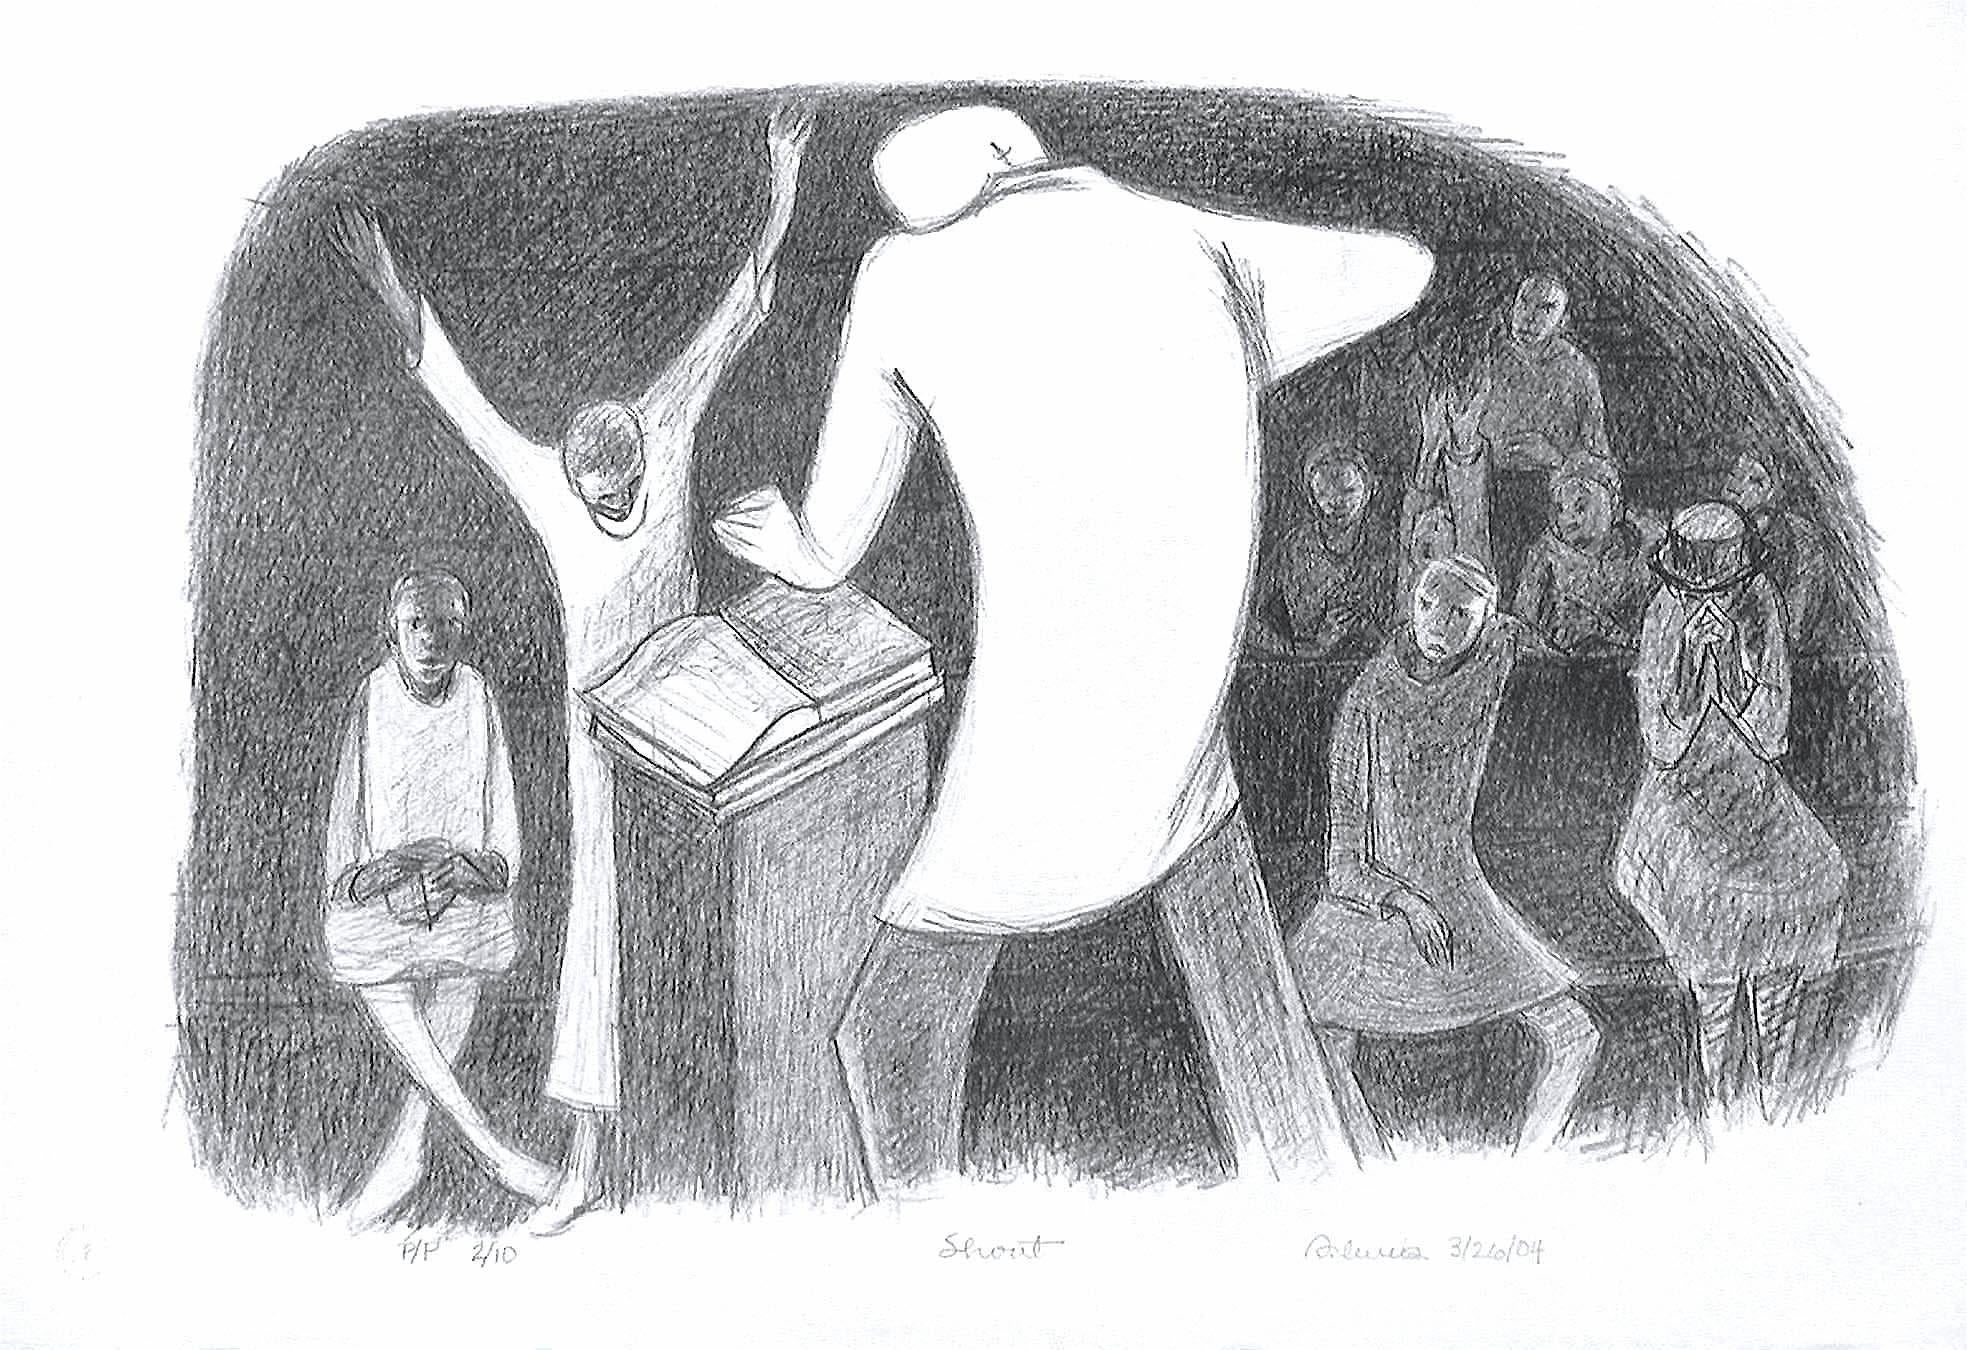 Shout, Hand Drawn Lithograph, Church Shout, African American Heritage  - Print by Samella Lewis